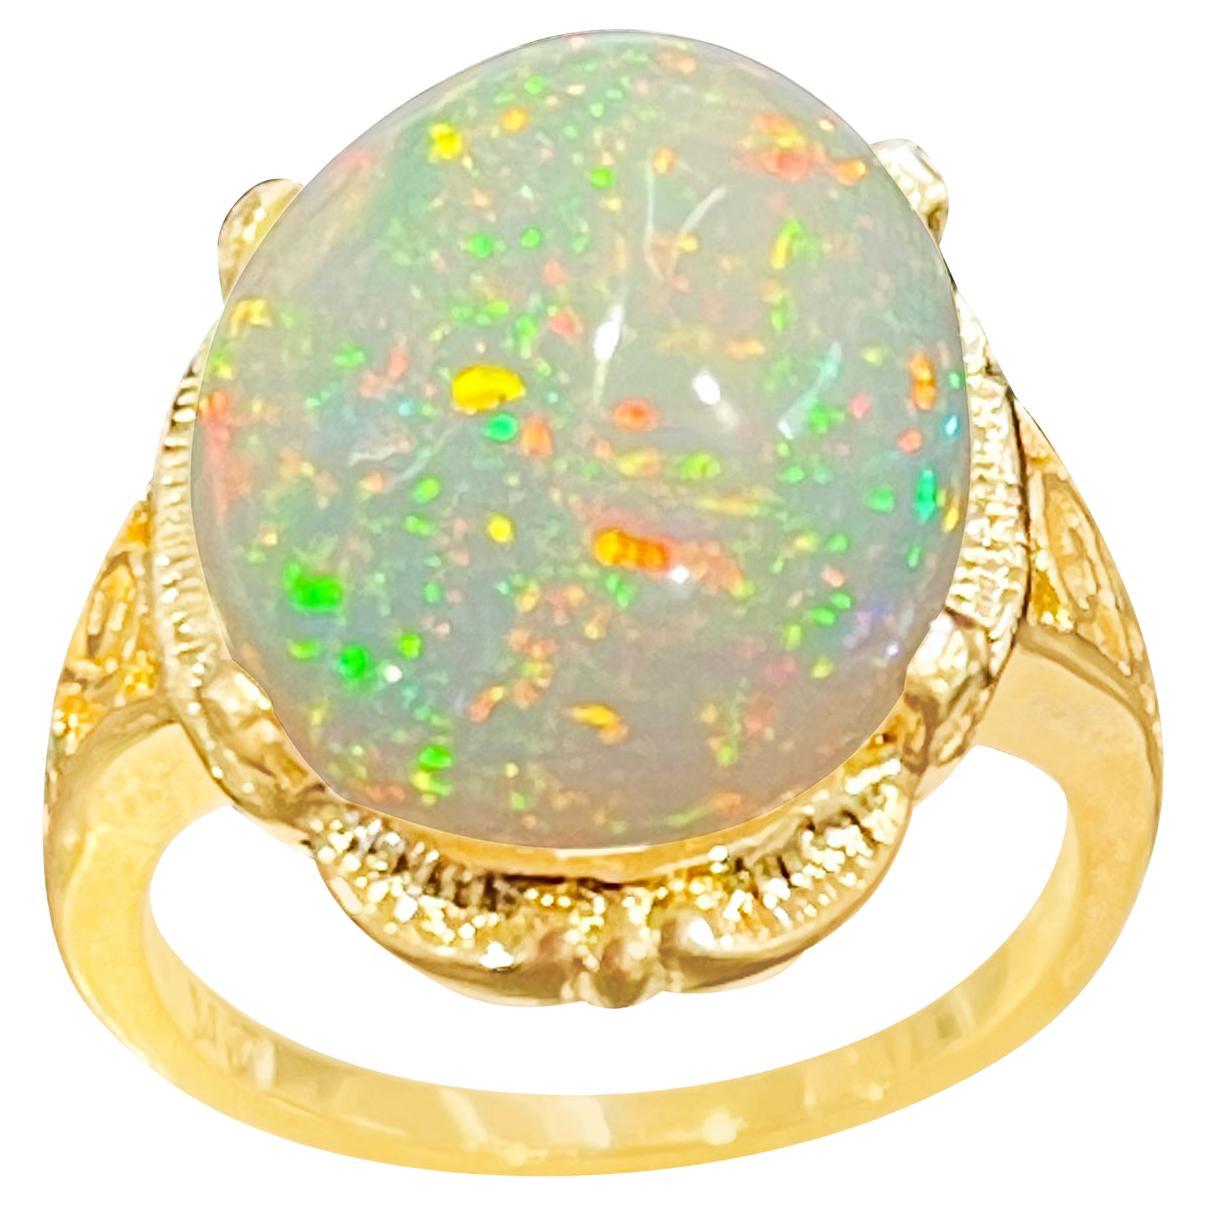 9 Carat Oval Shape Ethiopian Opal Cocktail Ring 14 Karat Yellow Gold For Sale